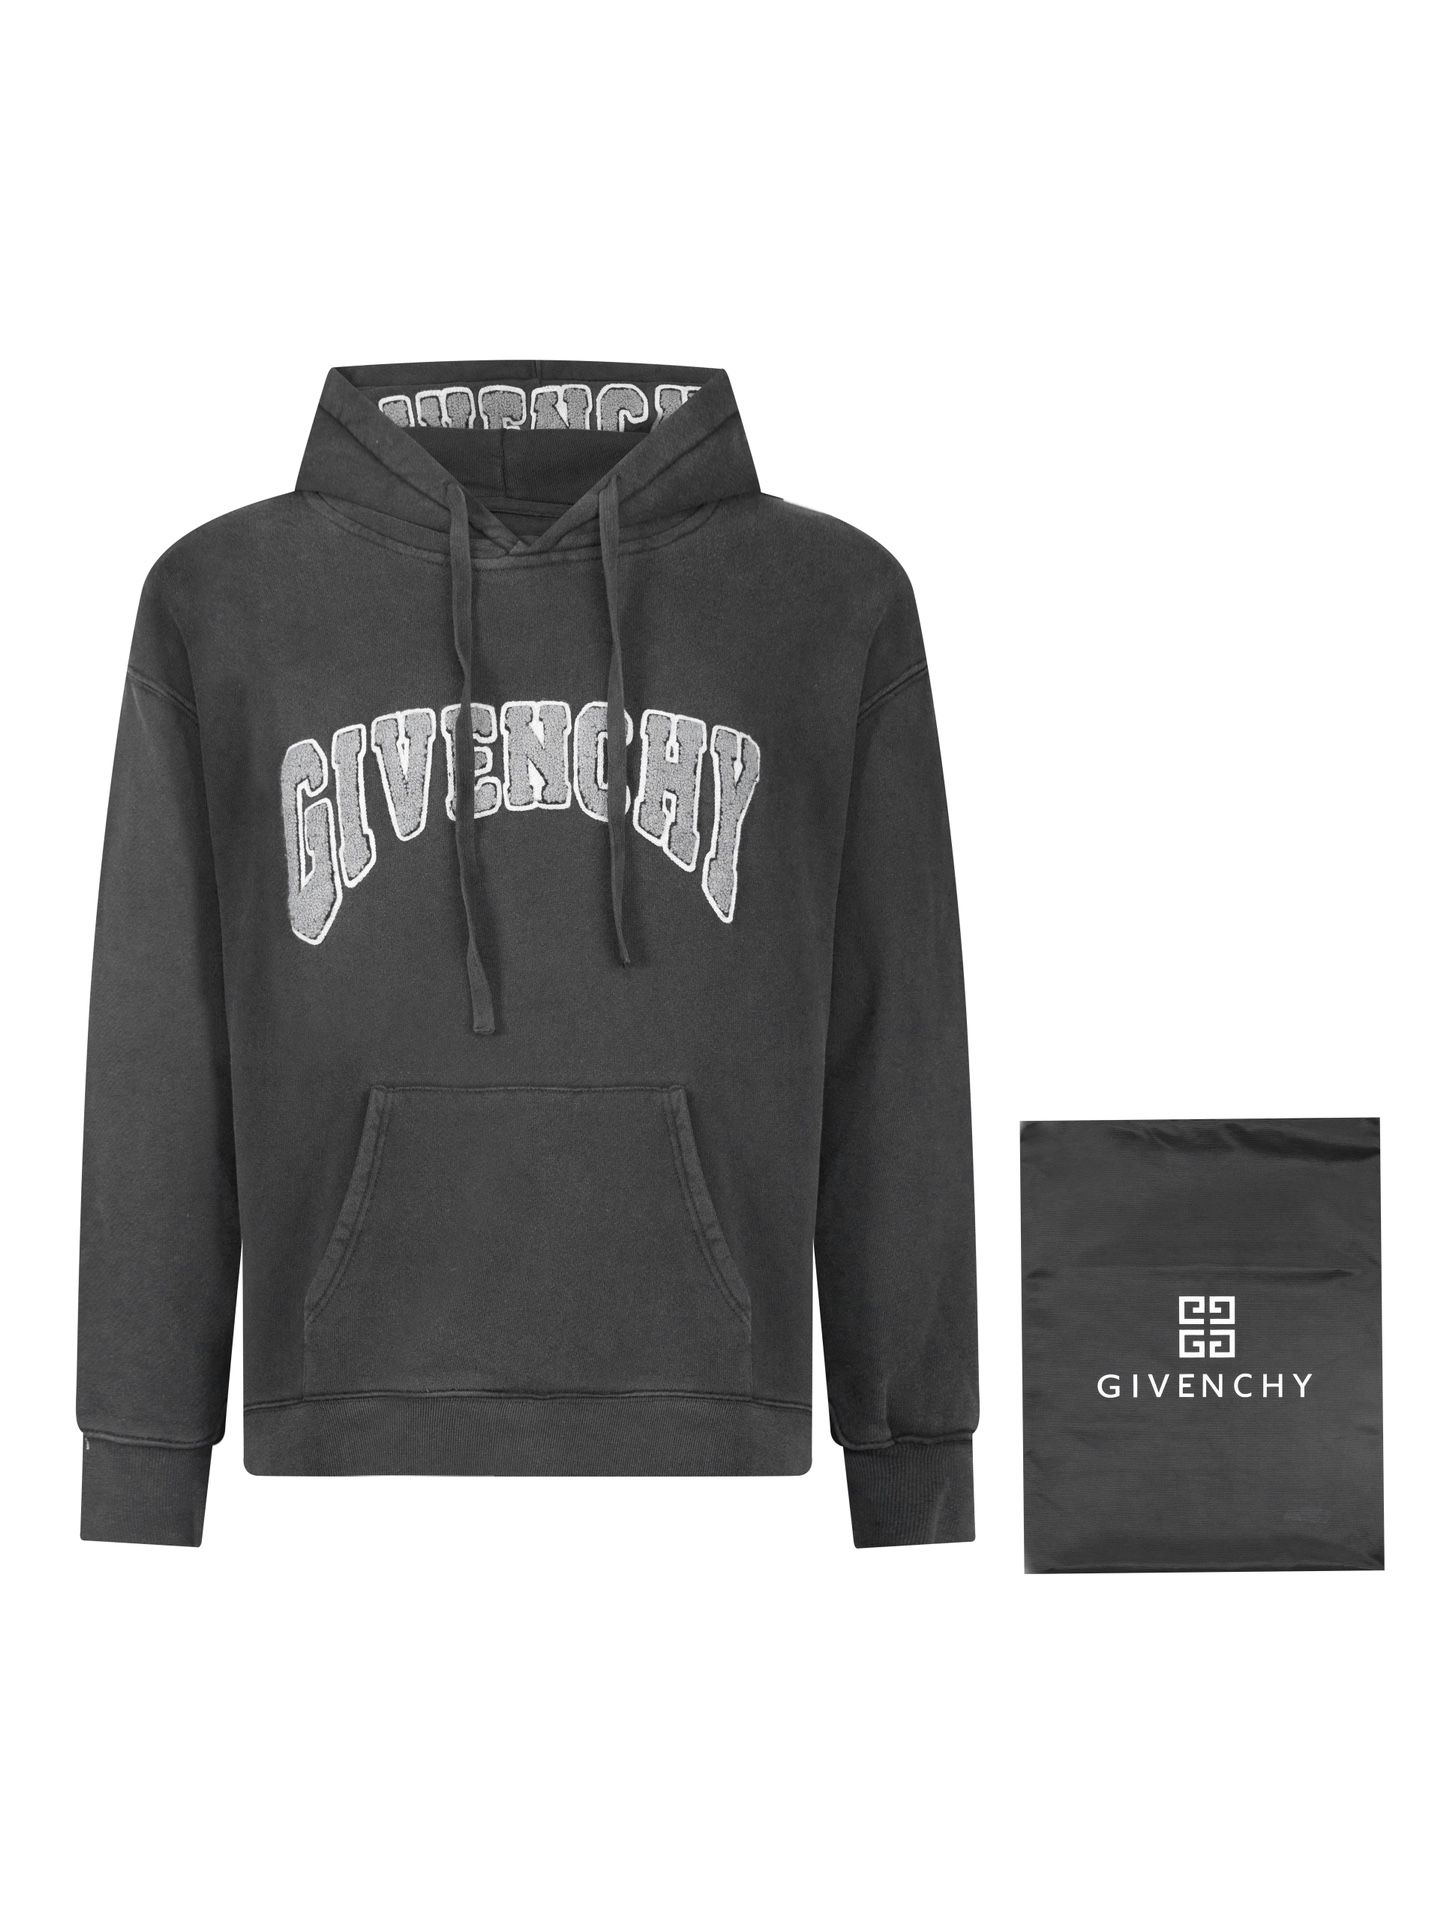 Good Givenchy Clothing Hoodies Black Blue Embroidery Unisex Women Cotton Knitting Hooded Top